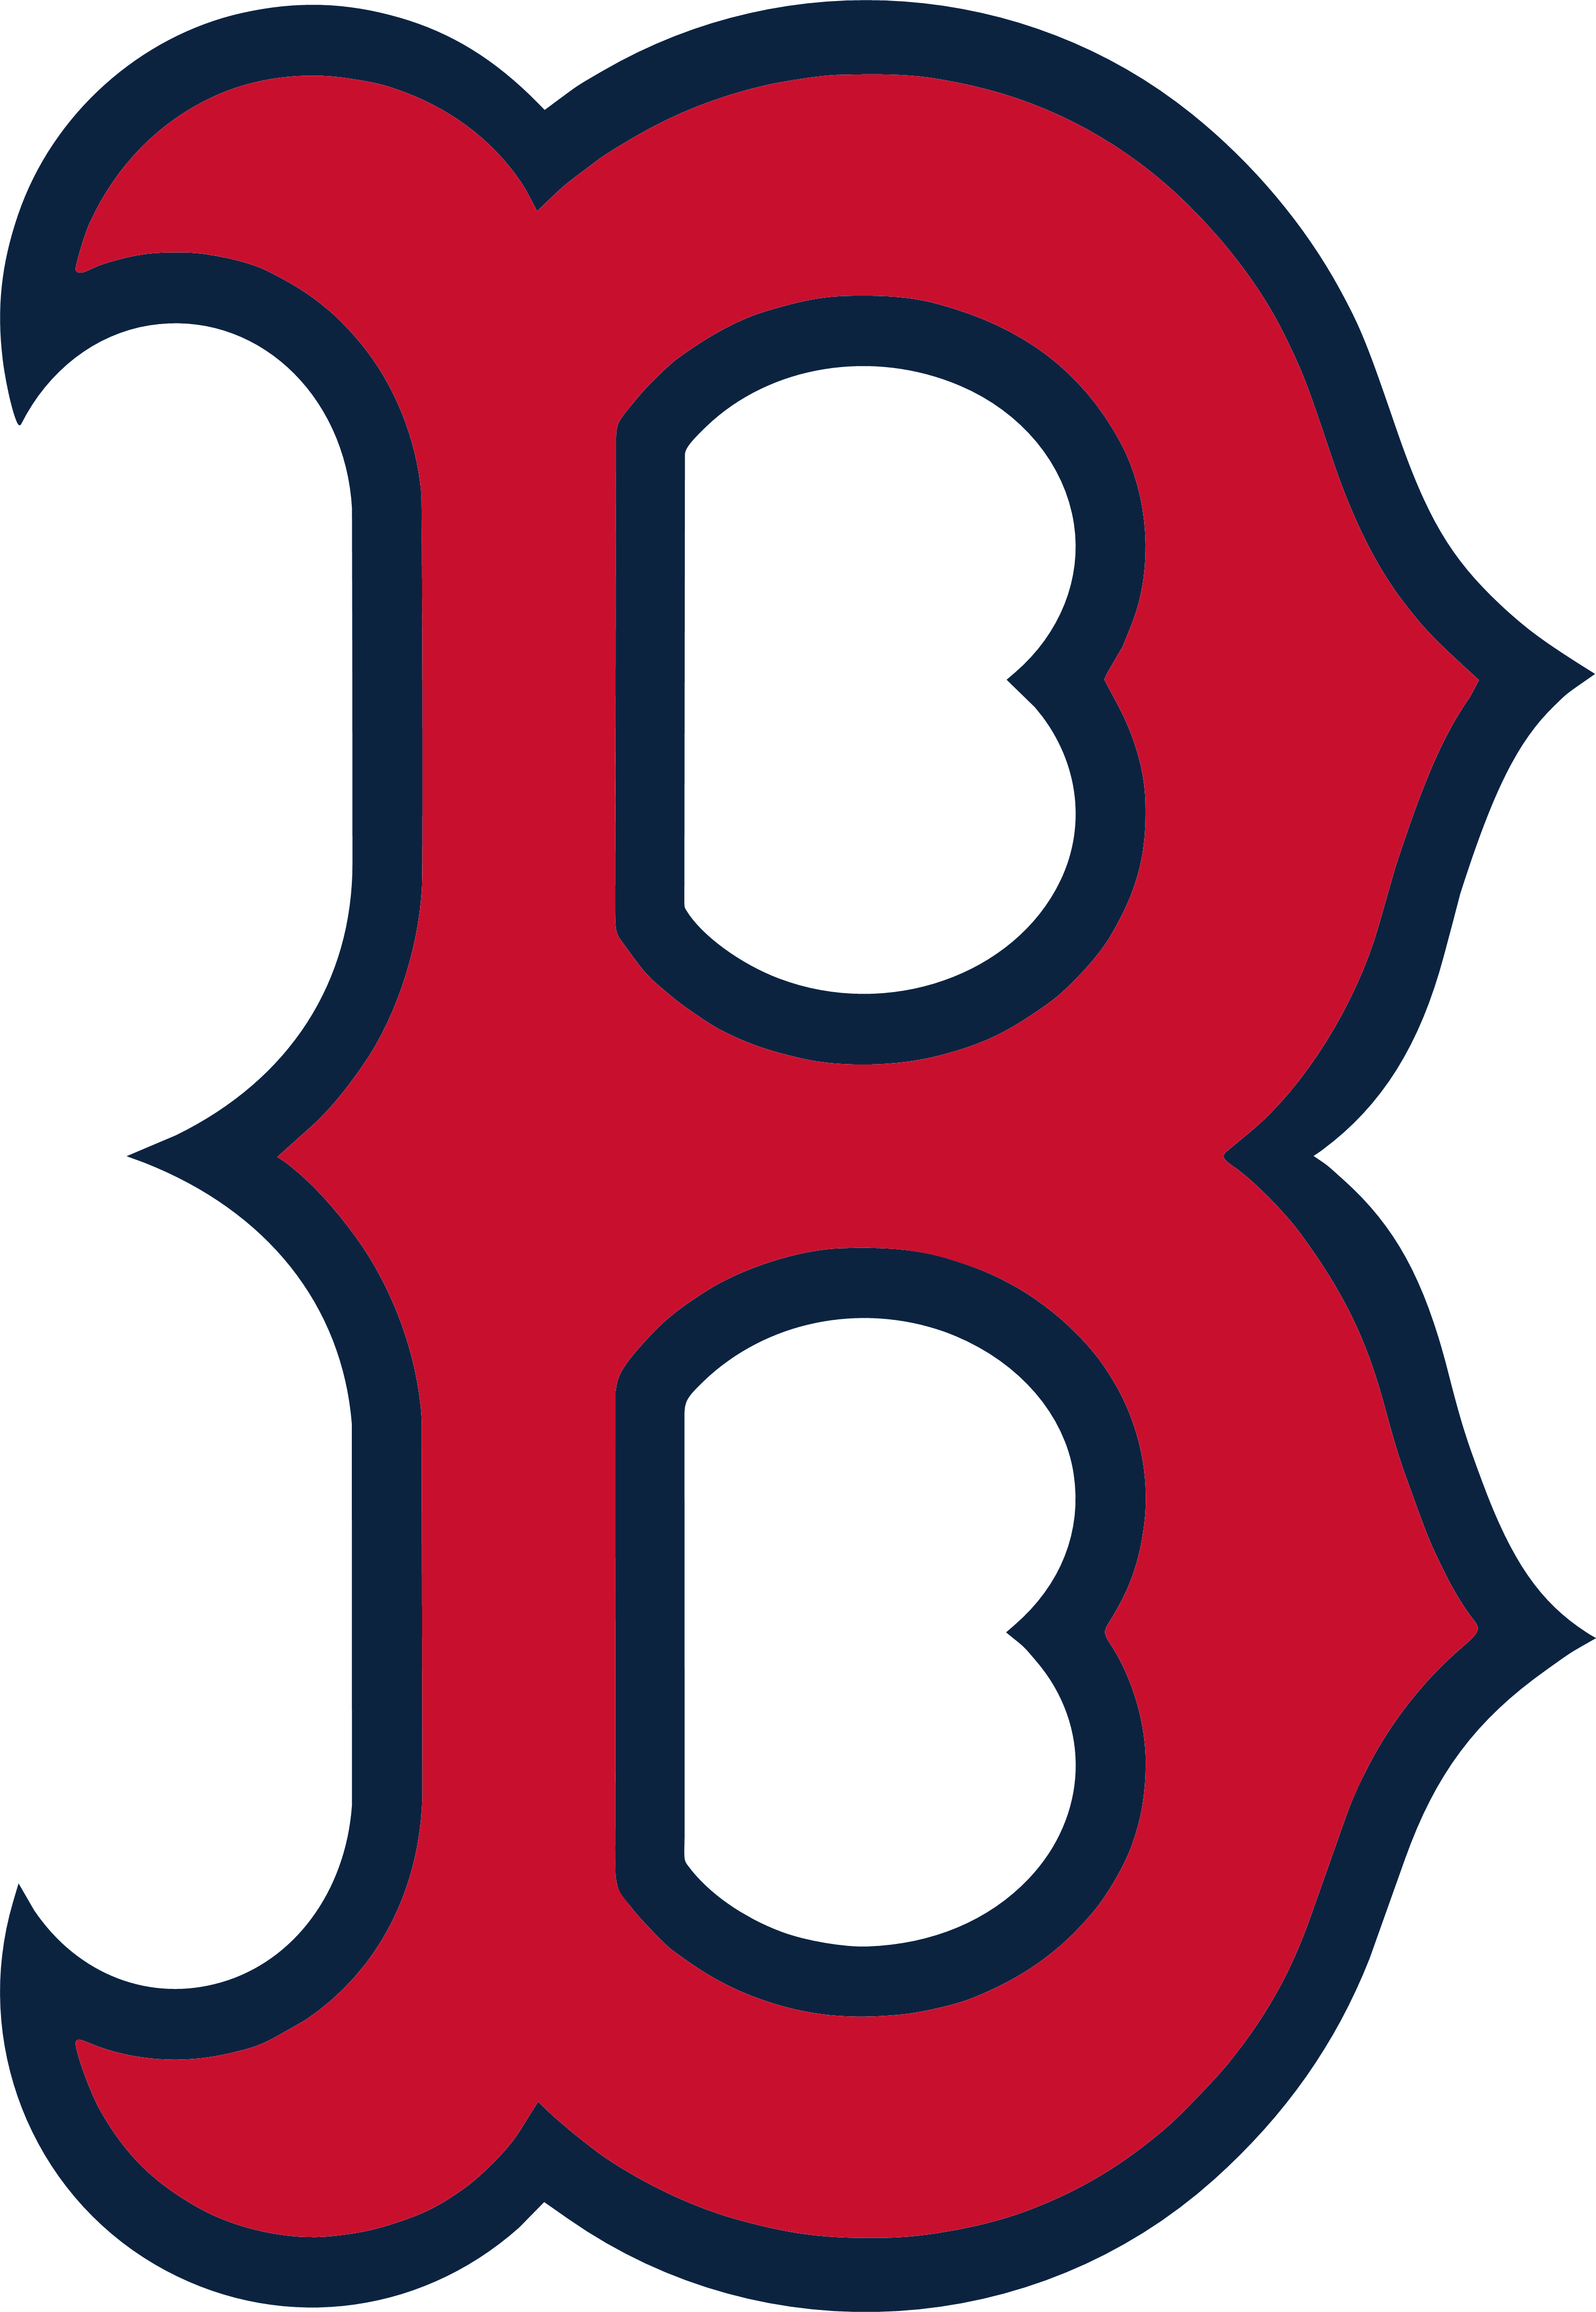 Boston Red Sox Logo Background PNG Image